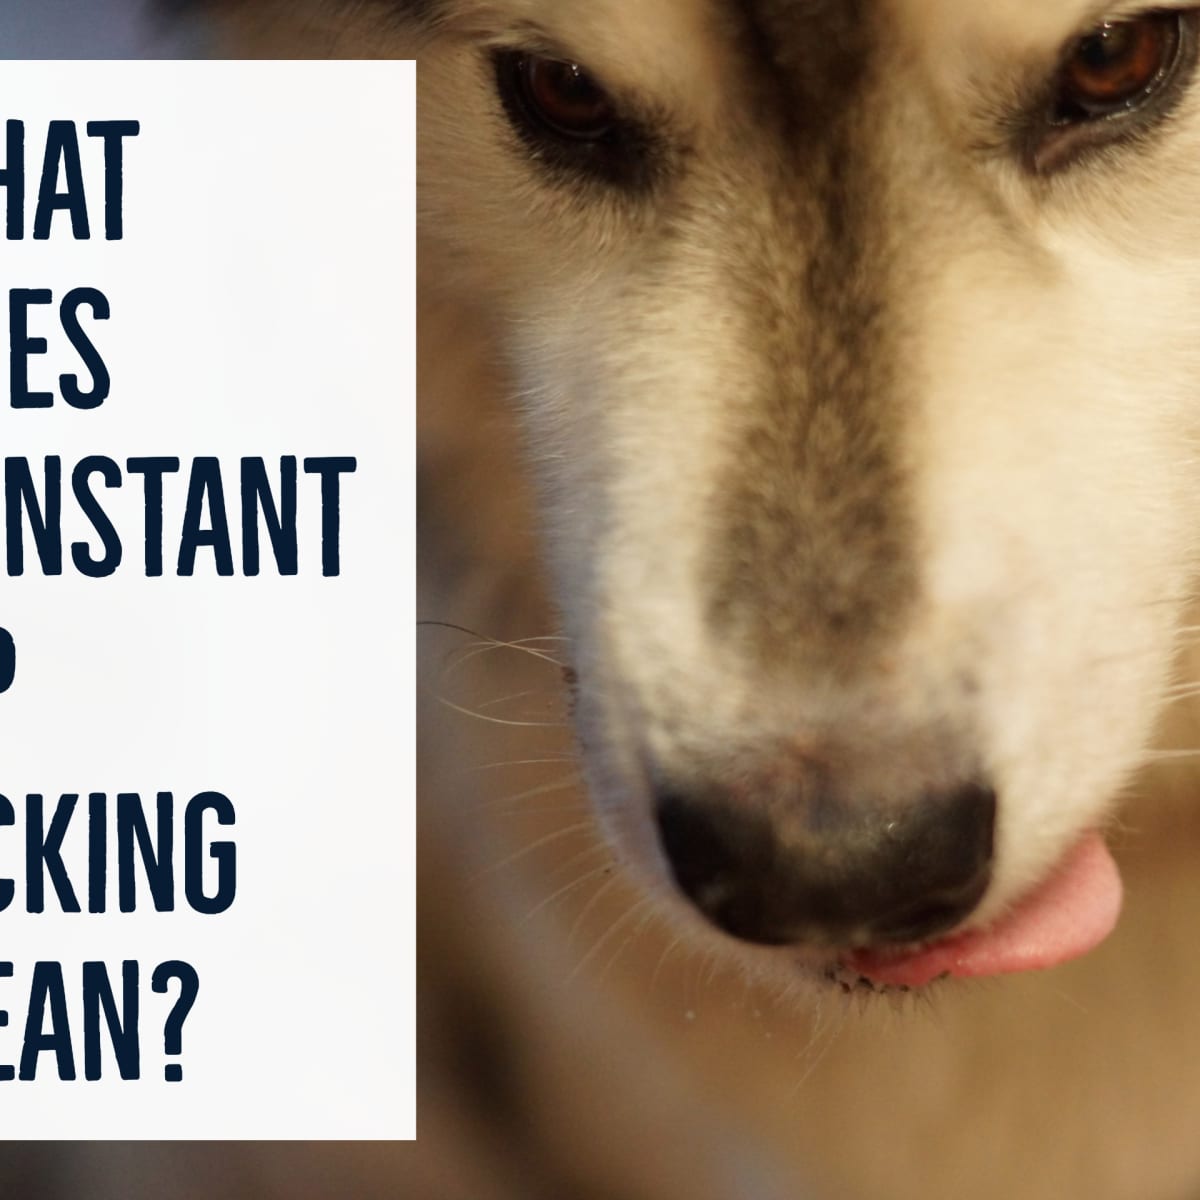 Why Does My Dog Lick Me? Why Do Dogs Lick People?